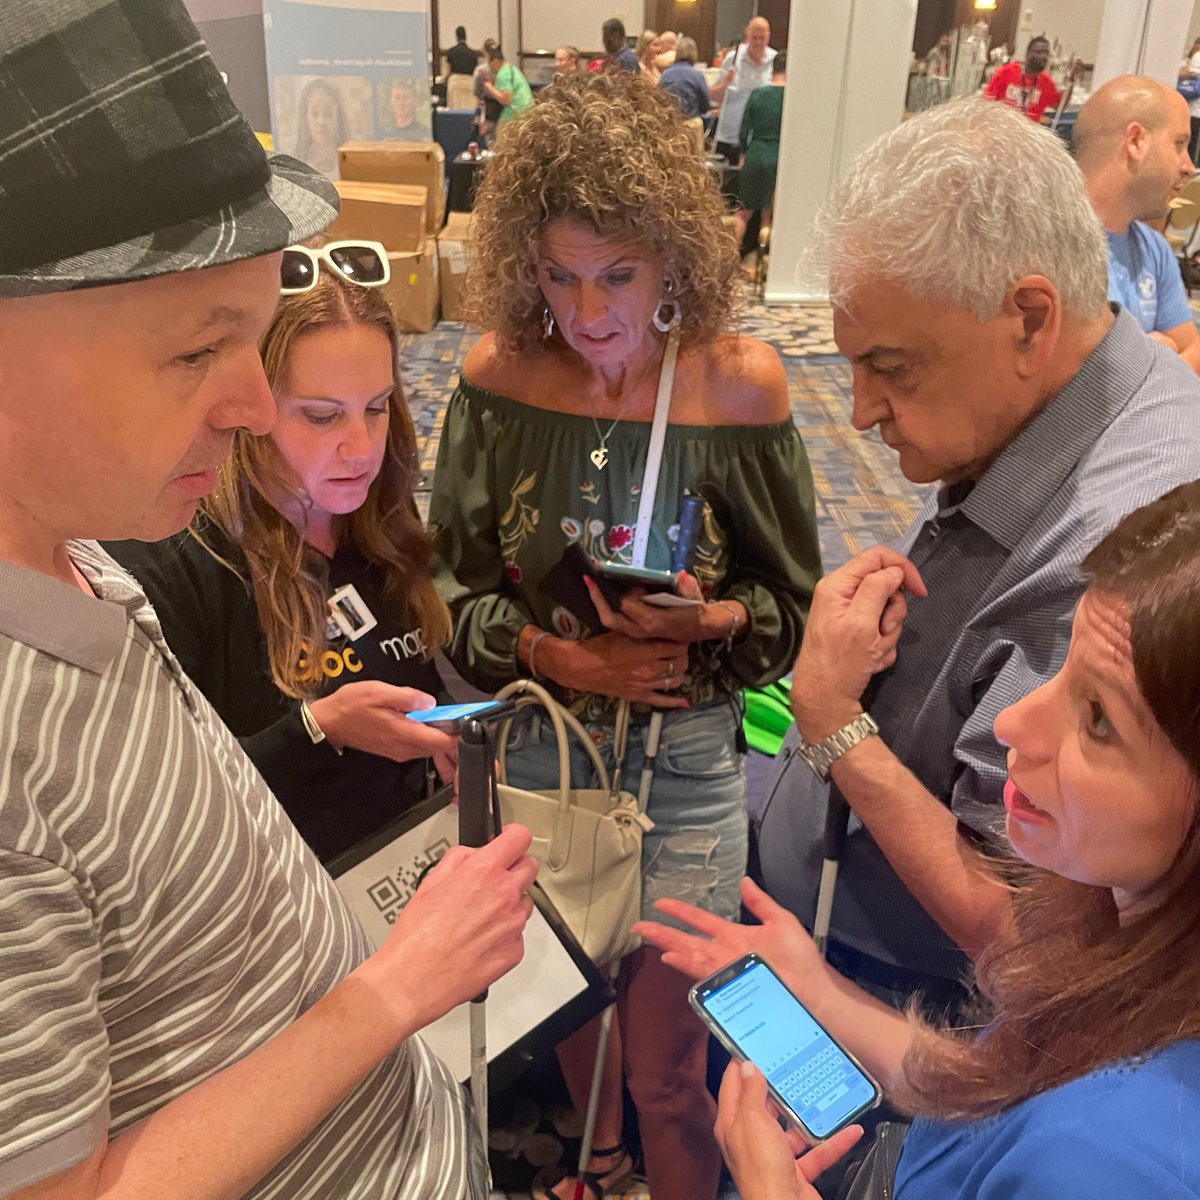 The GoodMaps team had a great time at this year’s @NFB_voice National Convention! #NFB23

Thanks to everyone for their interest in our infrastructure-free technology that provides unparalleled access and a fully immersive navigation experience.

goodmaps.com